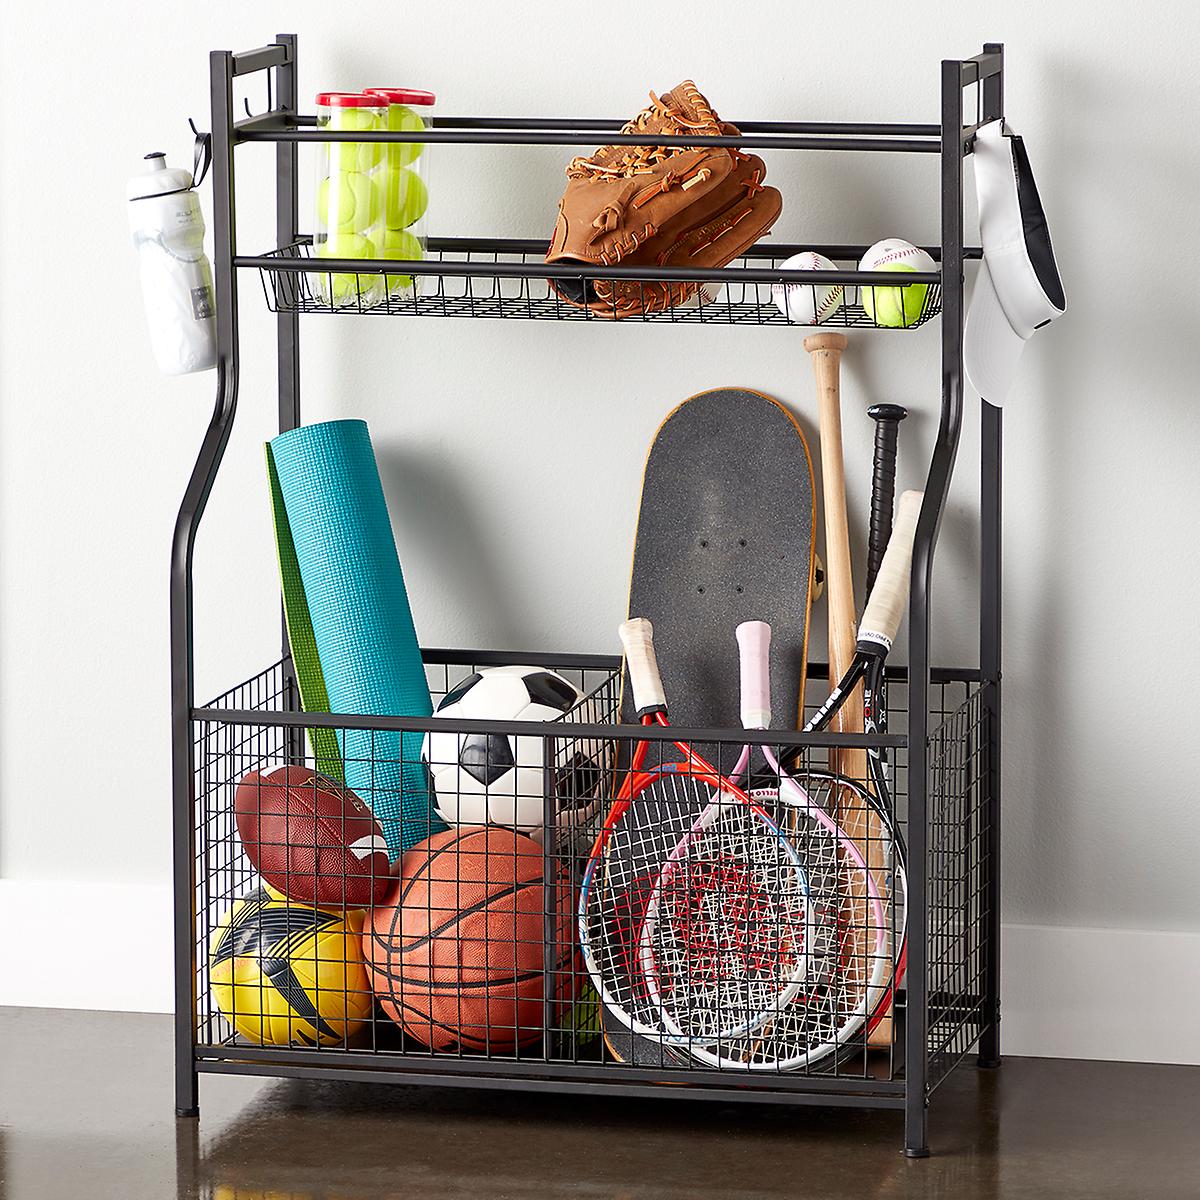 Steel Ball Storage Rack Garage Sports Equipment Oganizer With Baskets and Hooks Sports Gear Storage Rolling Sports Ball Storage Cart Omreid Garage Storage System Powder Coated For Adult,Black 